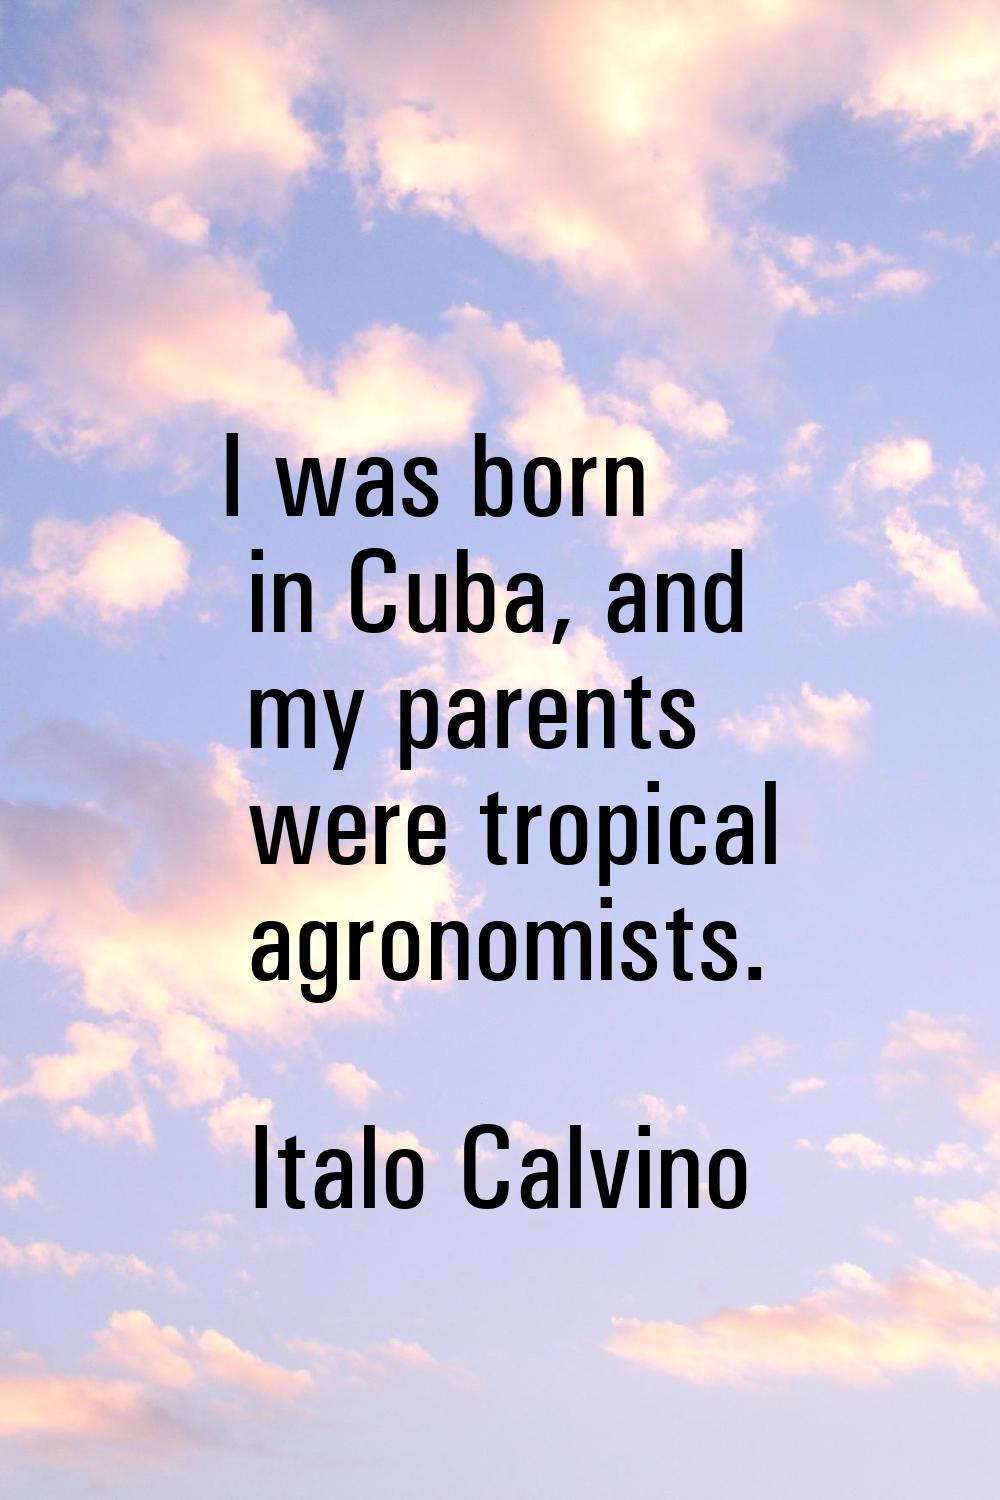 I was born in Cuba, and my parents were tropical agronomists.